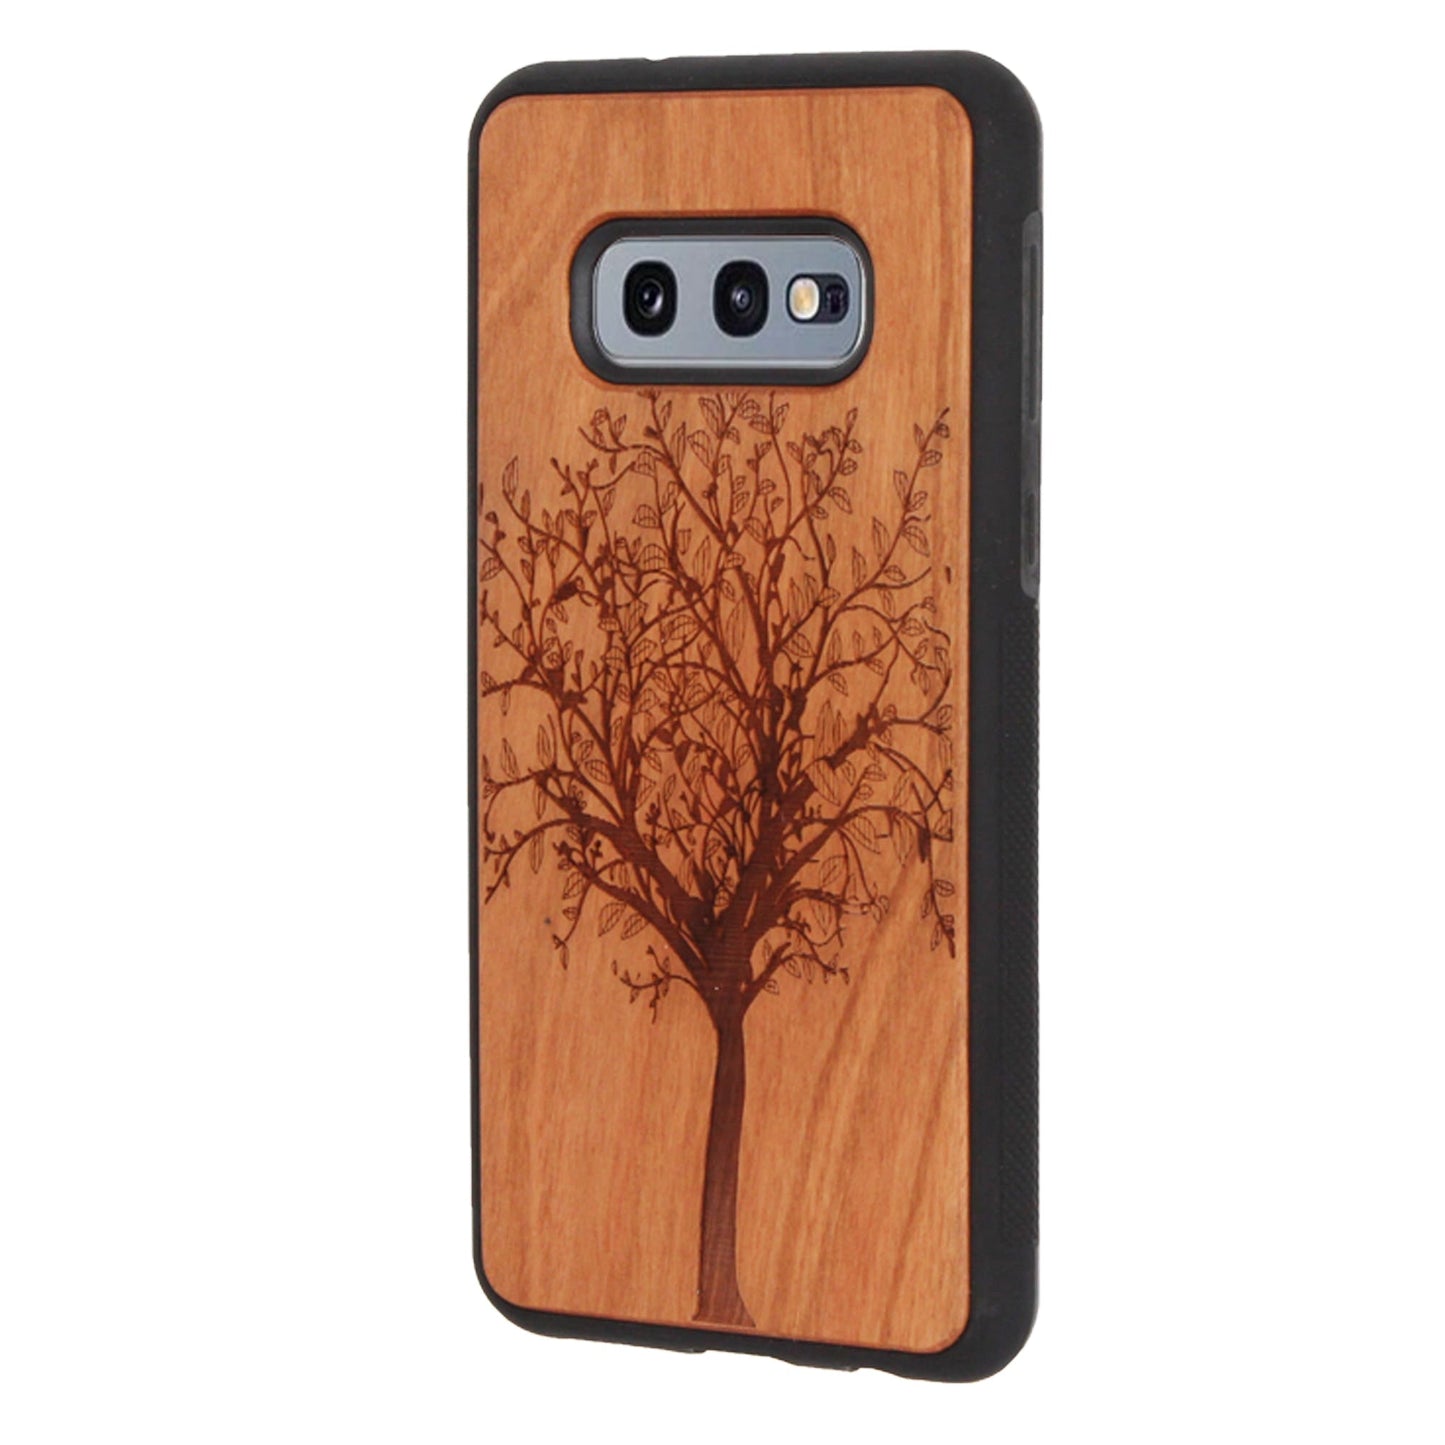 Eden tree of life case made of cherry wood for Samsung Galaxy S10E